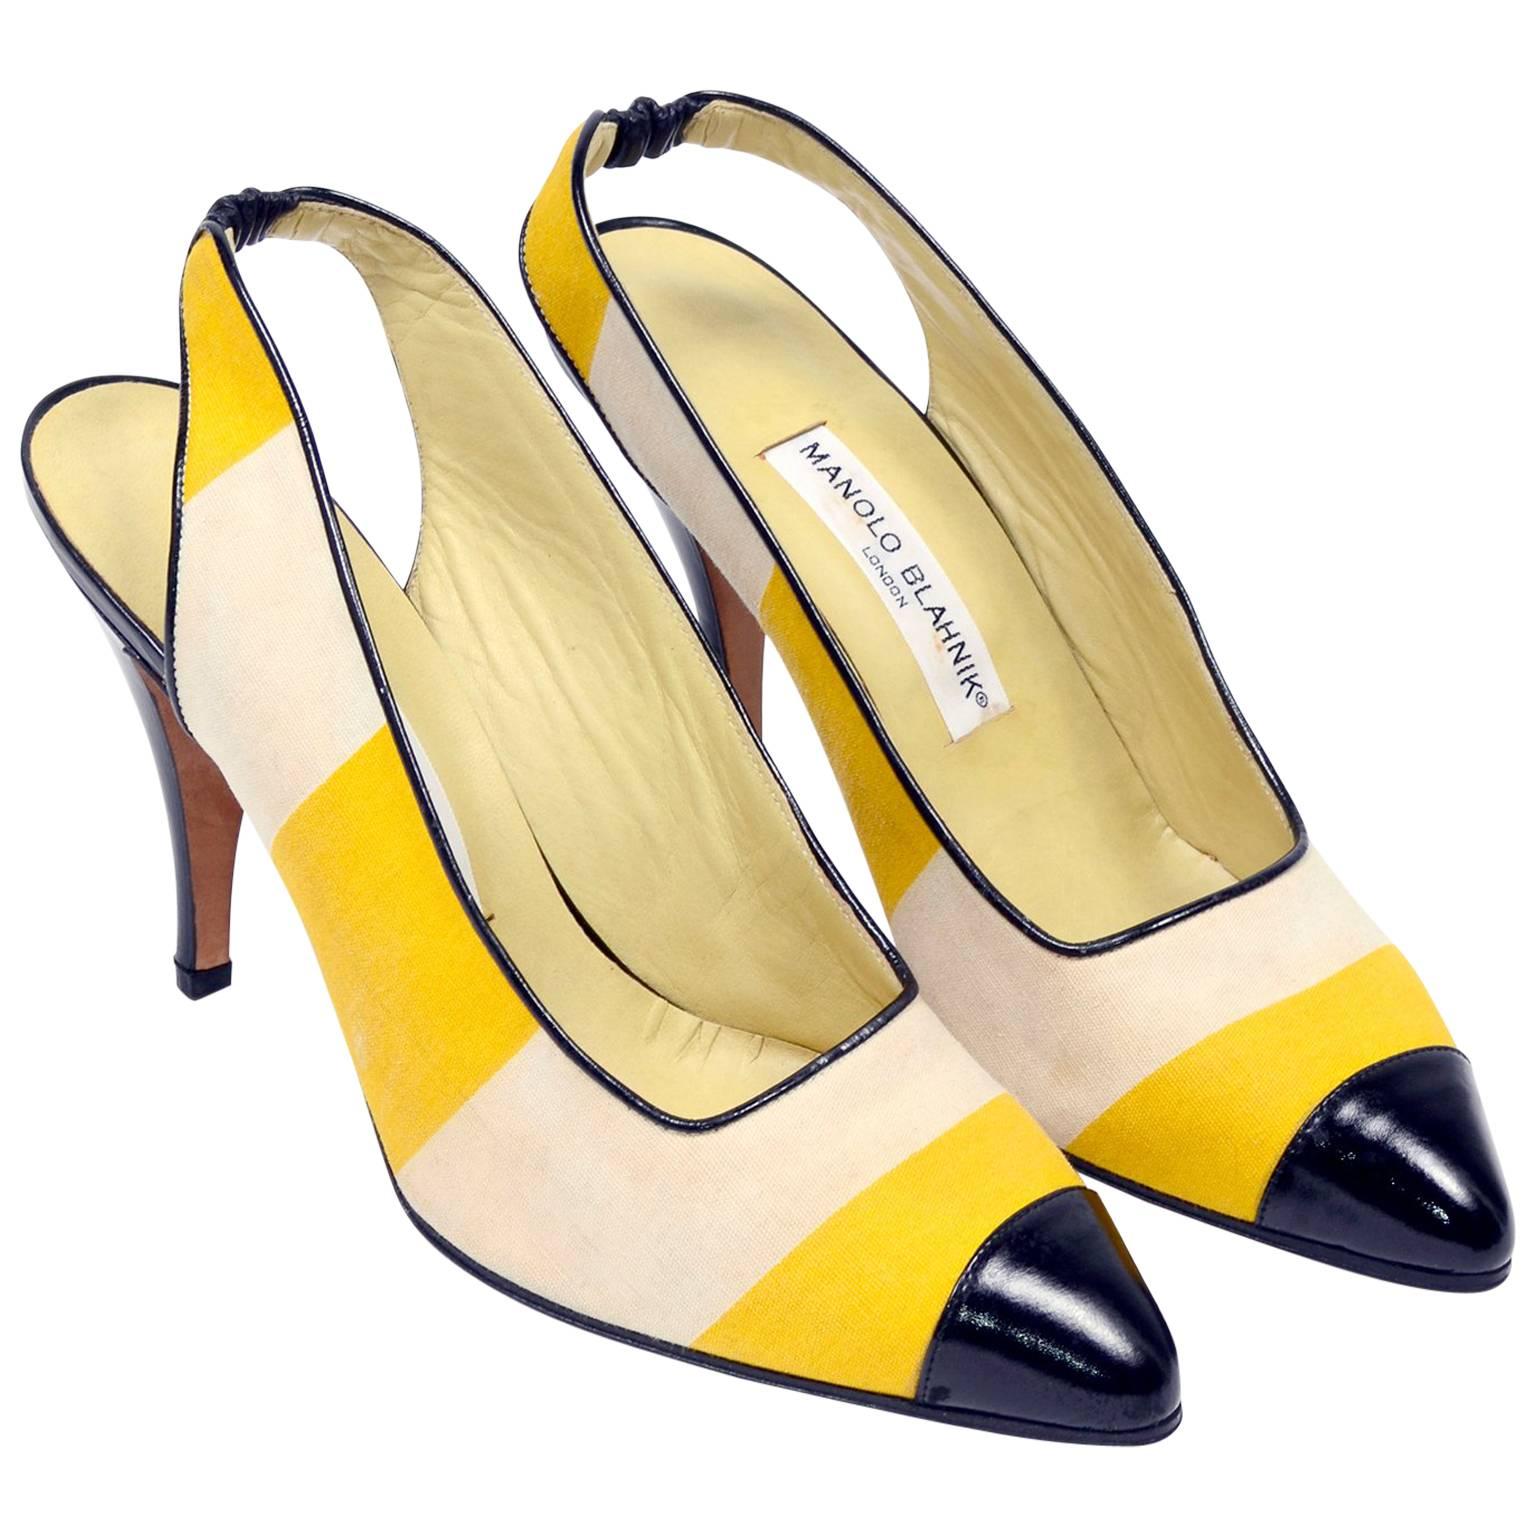 Manolo Blahnik Yellow and Cream Stripe Black Patent Leather Heeled Shoes, 1980s